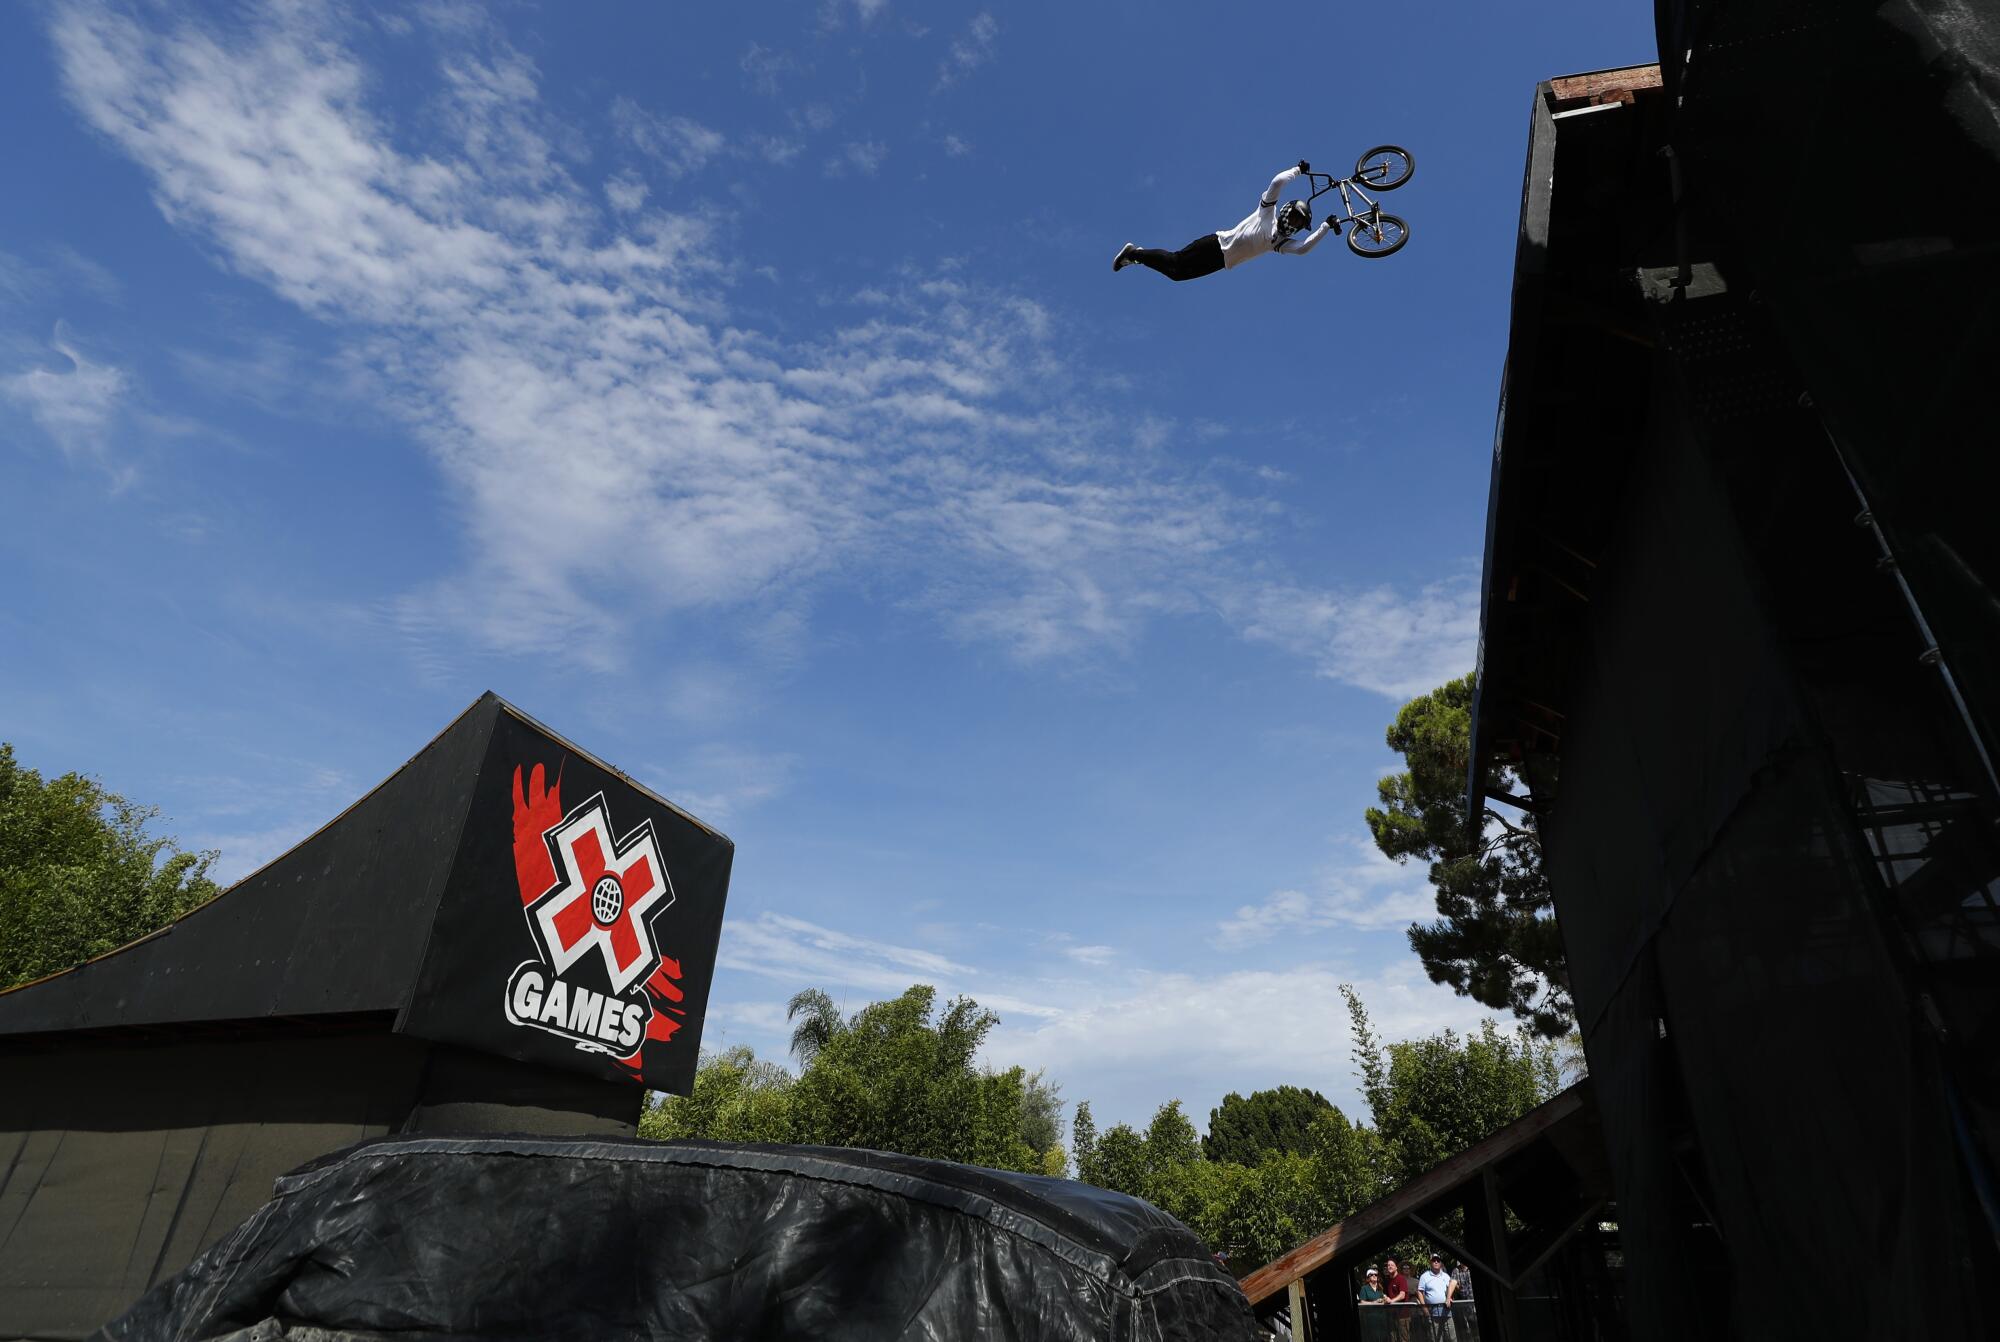 Mykel Larrin competes in the BMX megapark.